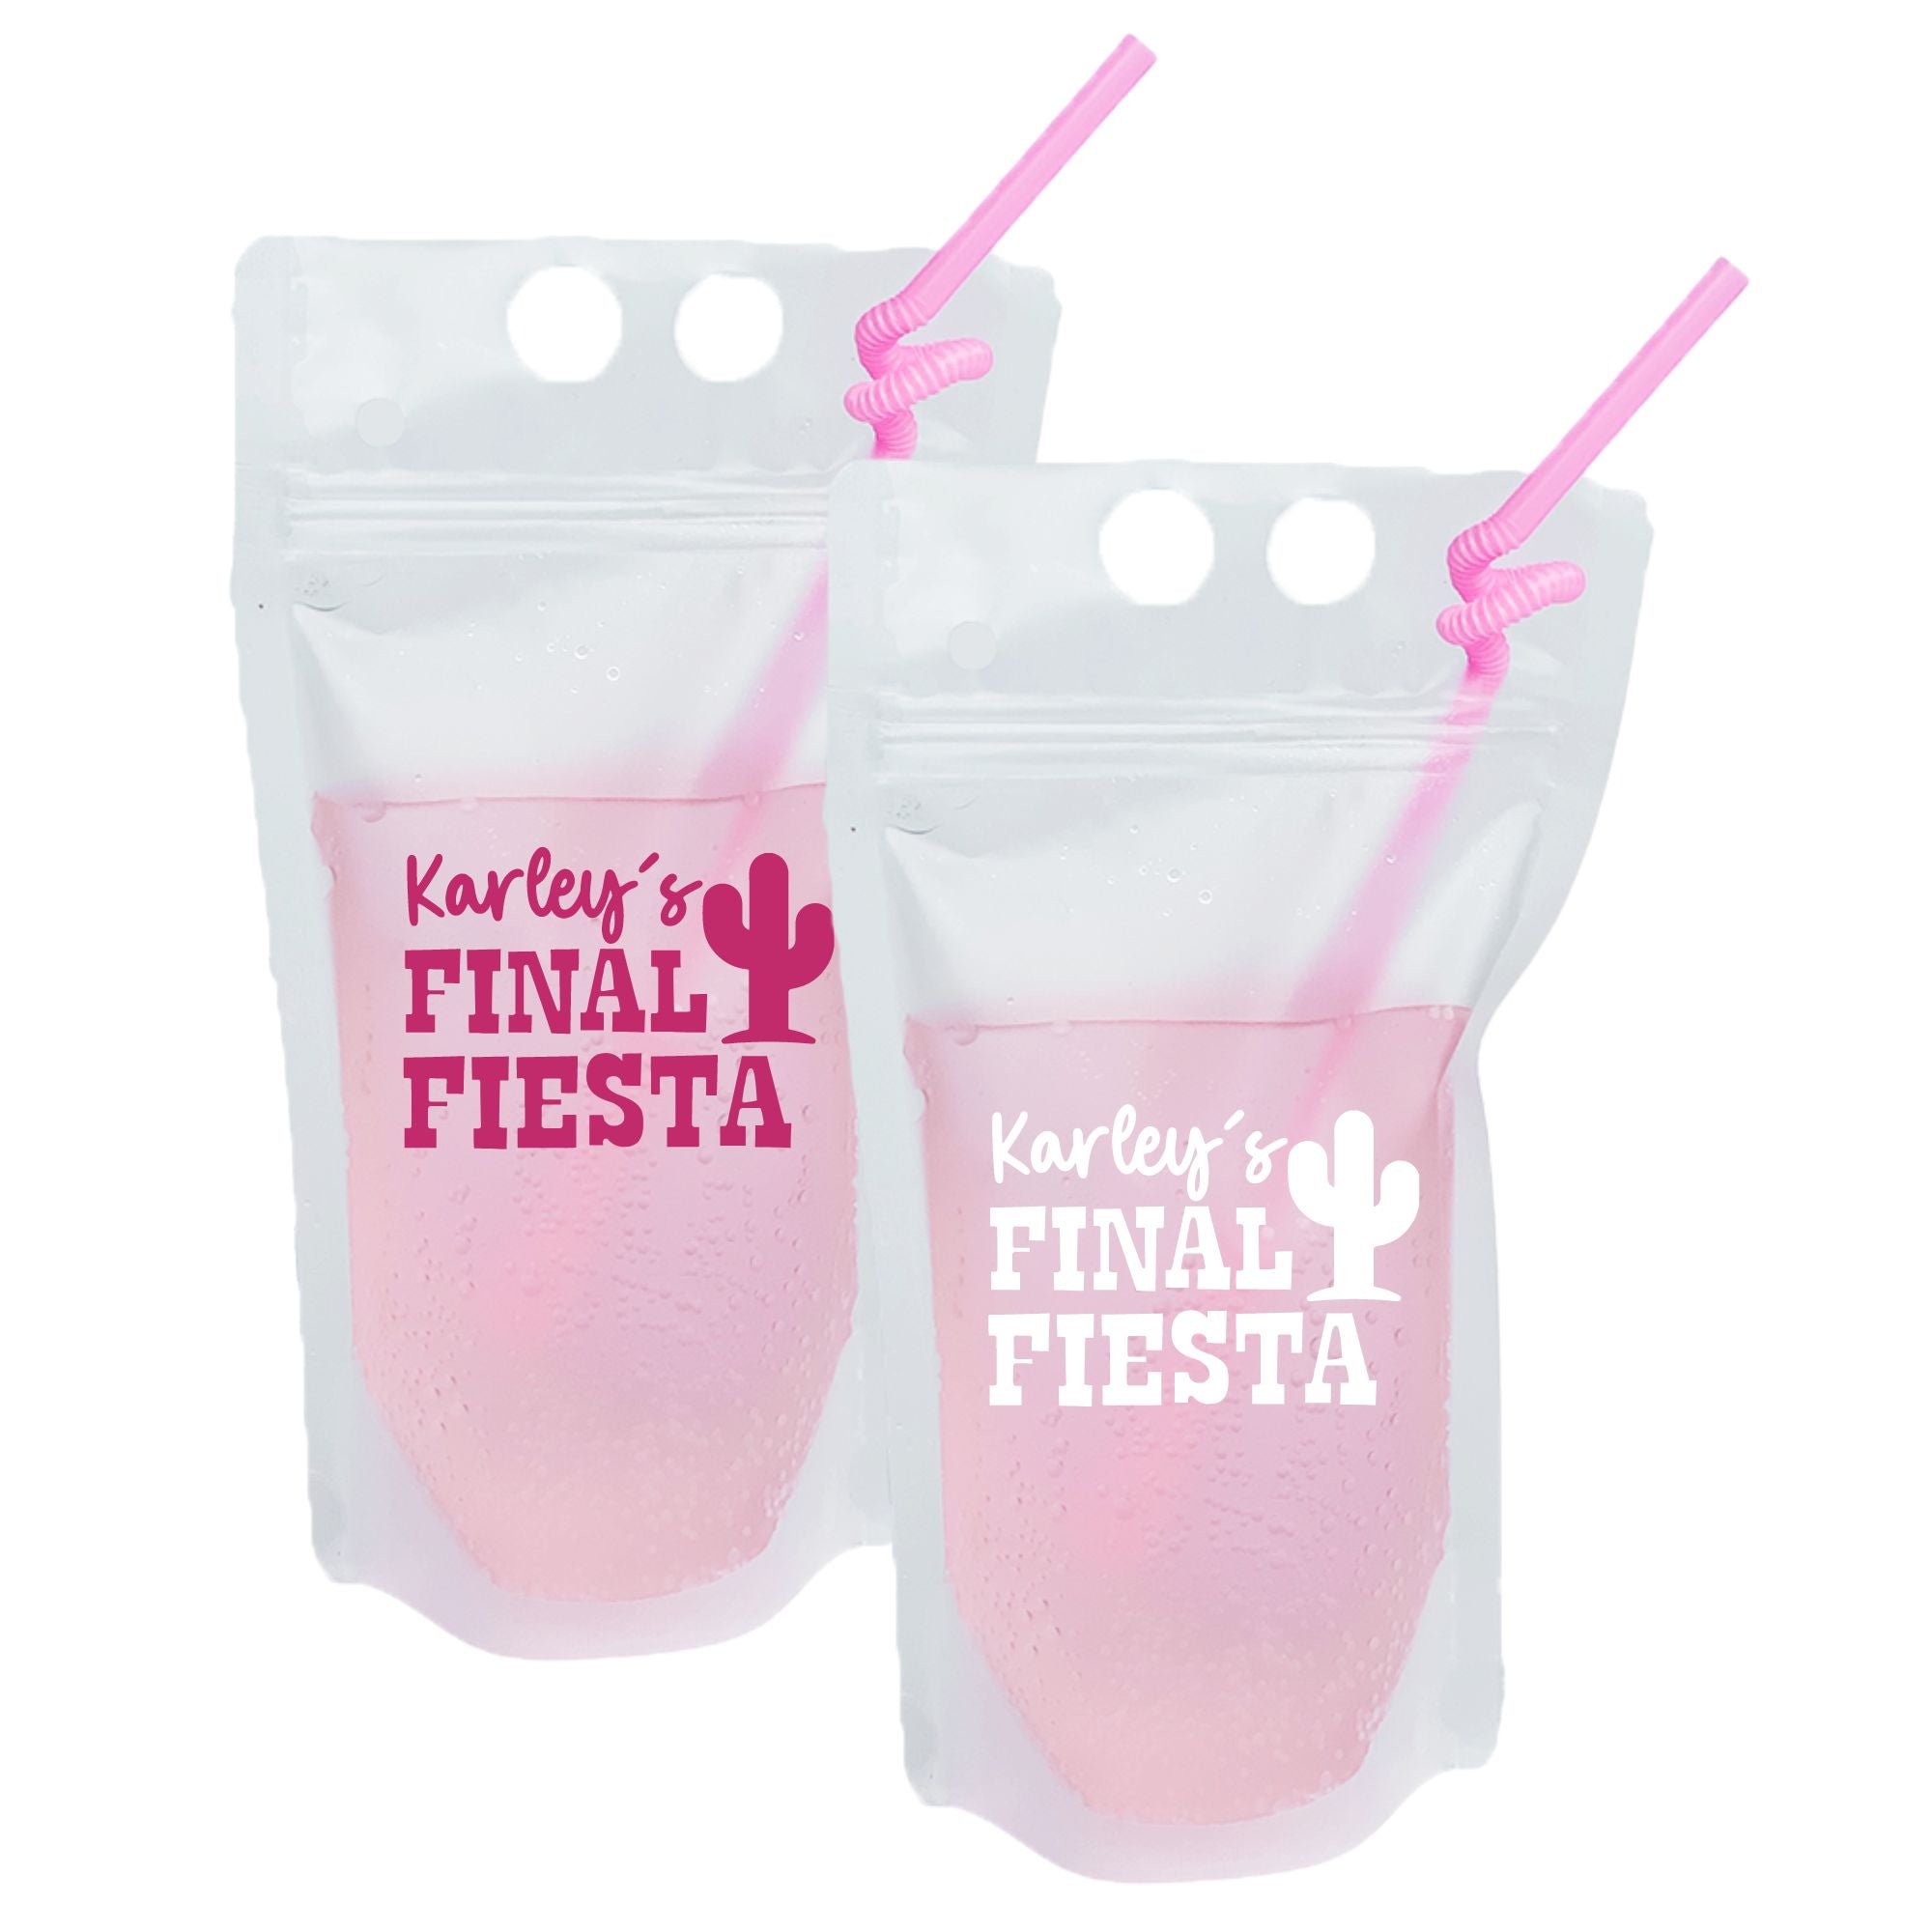 Custom Final Fiesta with cactus Party Pouch - Sprinkled With Pink #bachelorette #custom #gifts